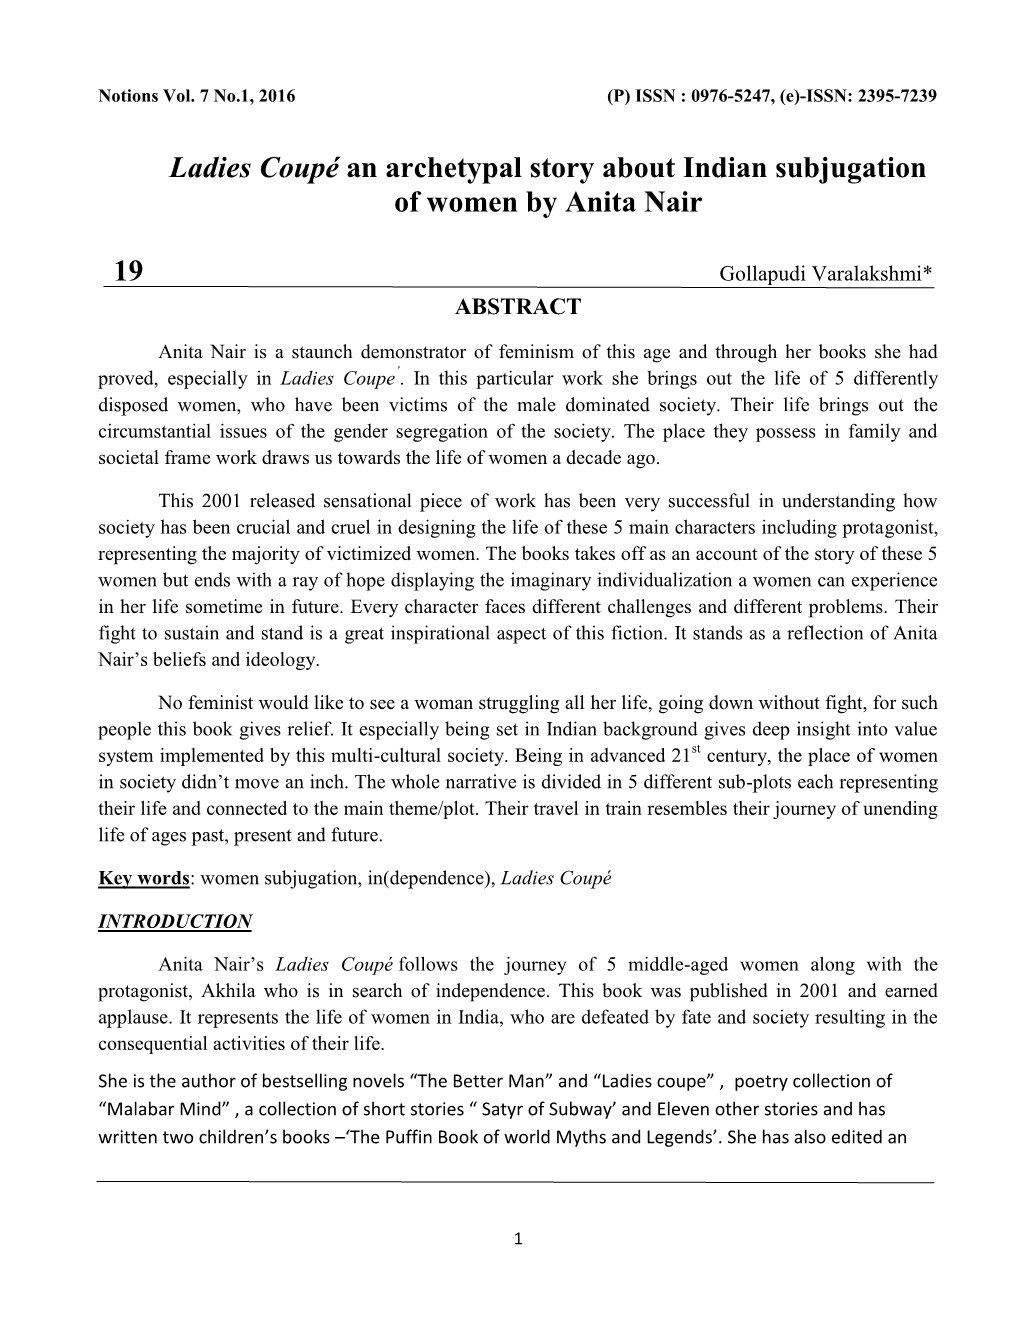 Ladies Coupé an Archetypal Story About Indian Subjugation of Women by Anita Nair